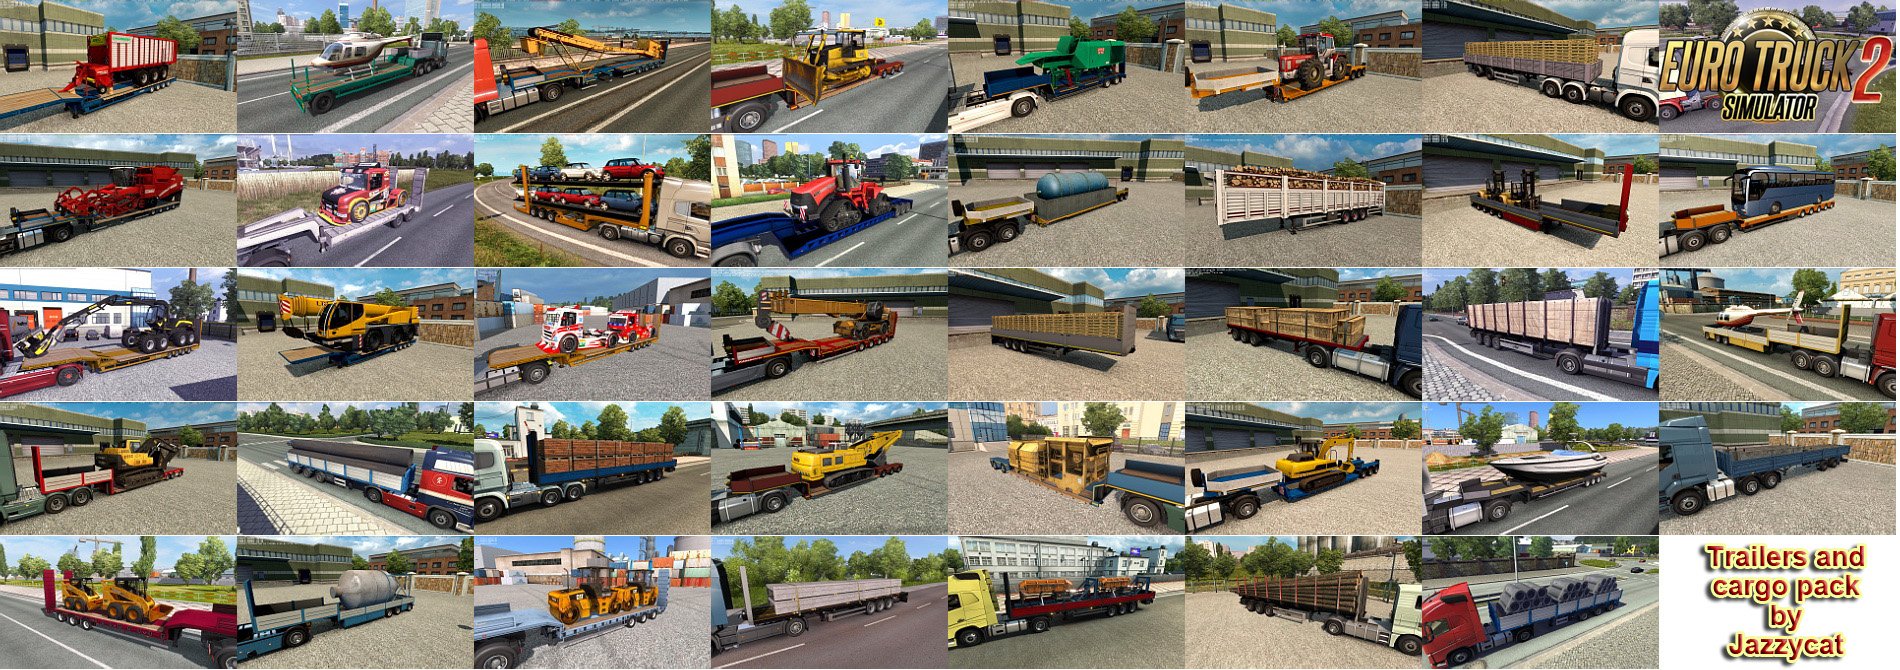 Trailers and Cargo Pack v7.7 by Jazzycat